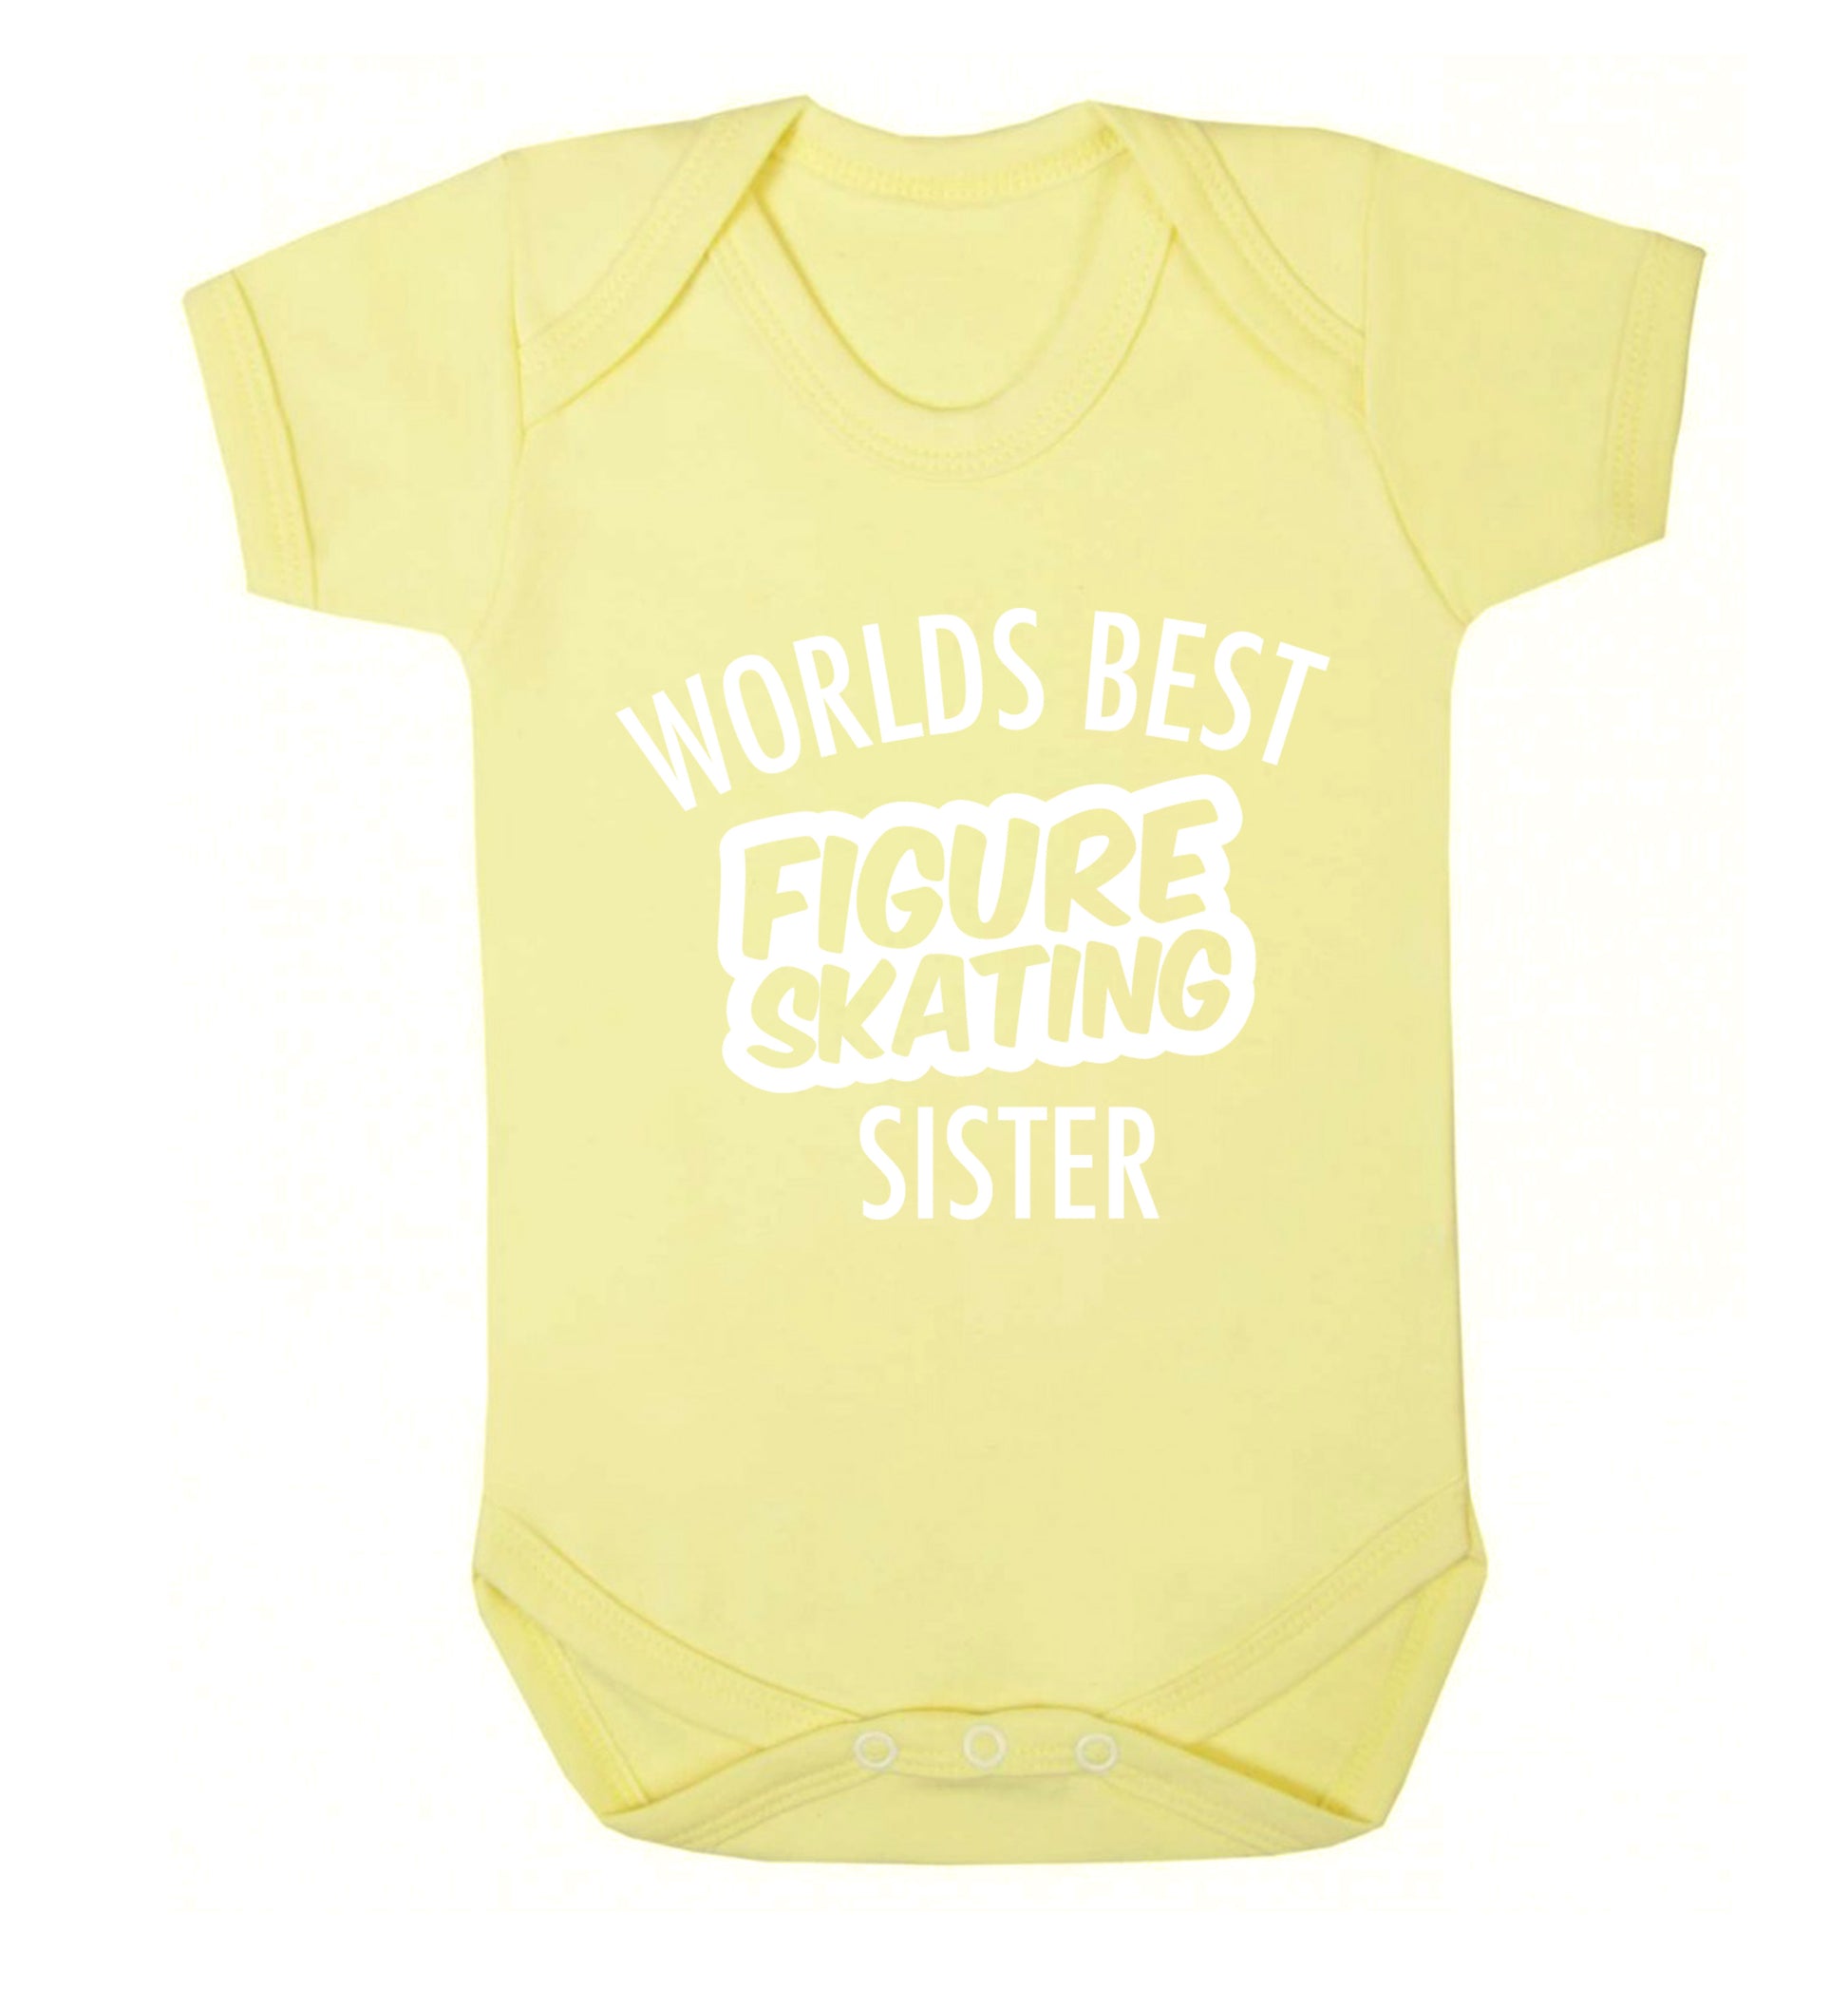 Worlds best figure skating sisterBaby Vest pale yellow 18-24 months